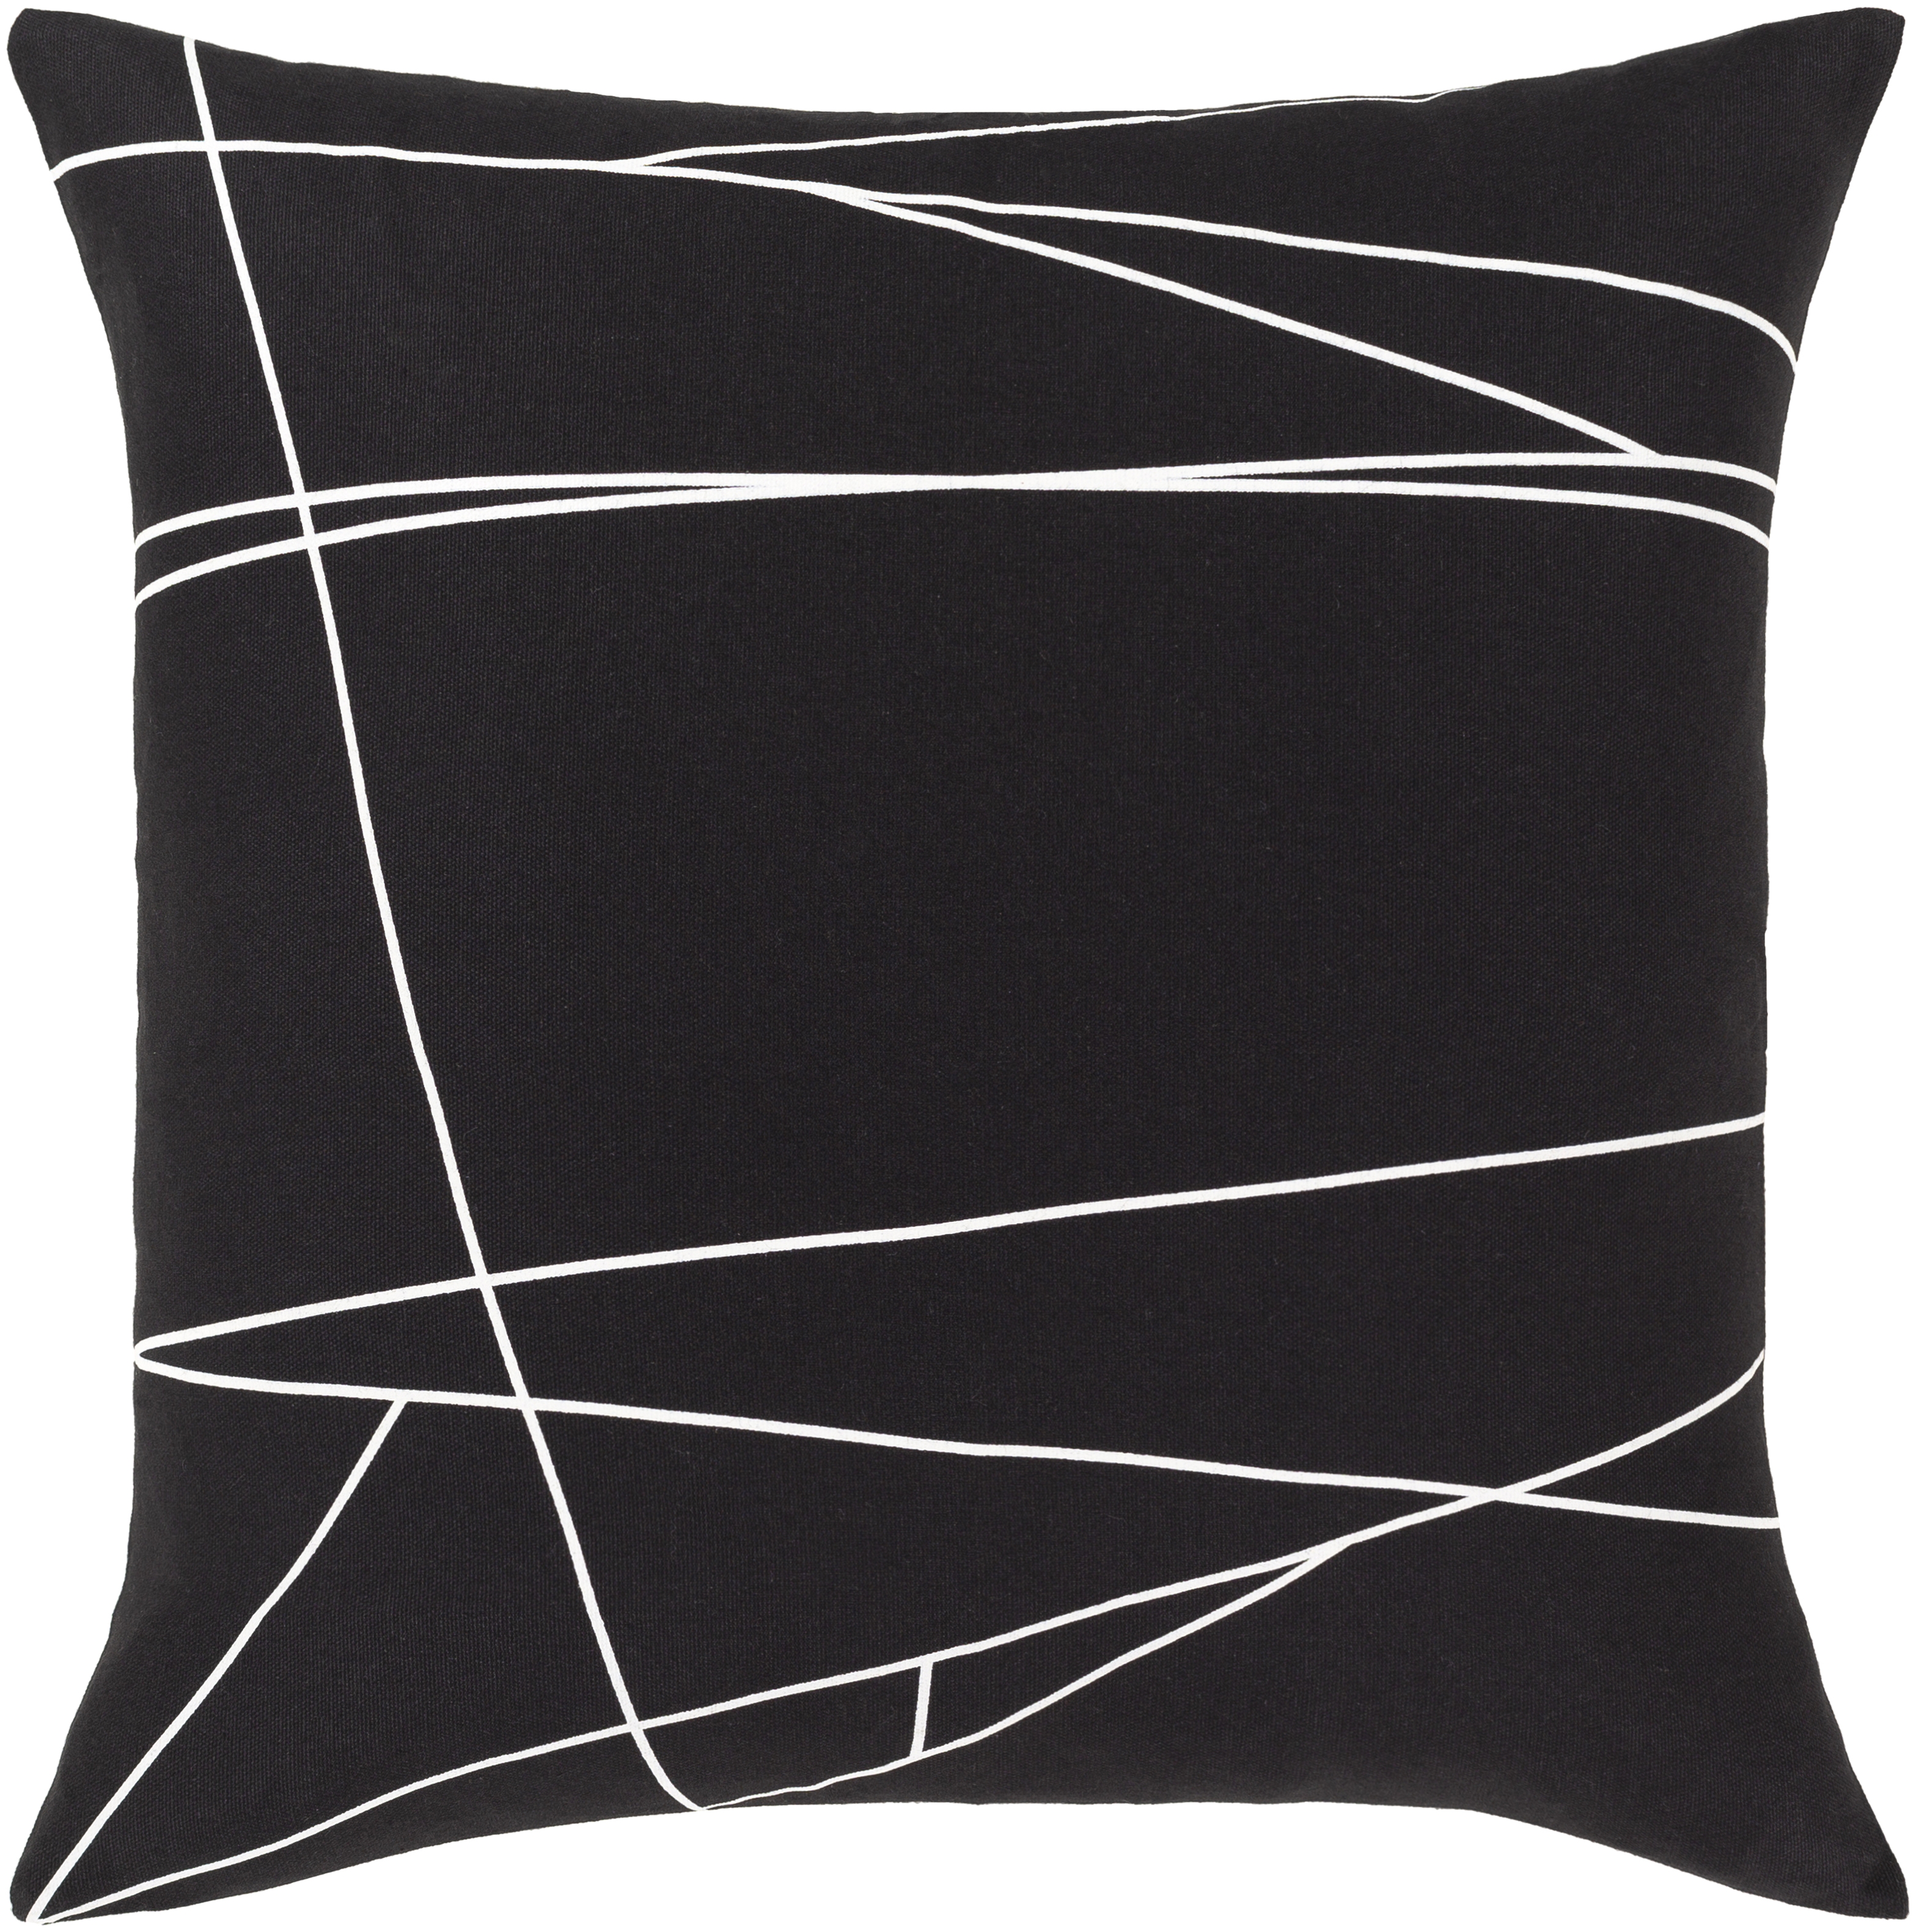 Graphic Punch - GPC-004 - 18" x 18" - pillow cover only - Image 0